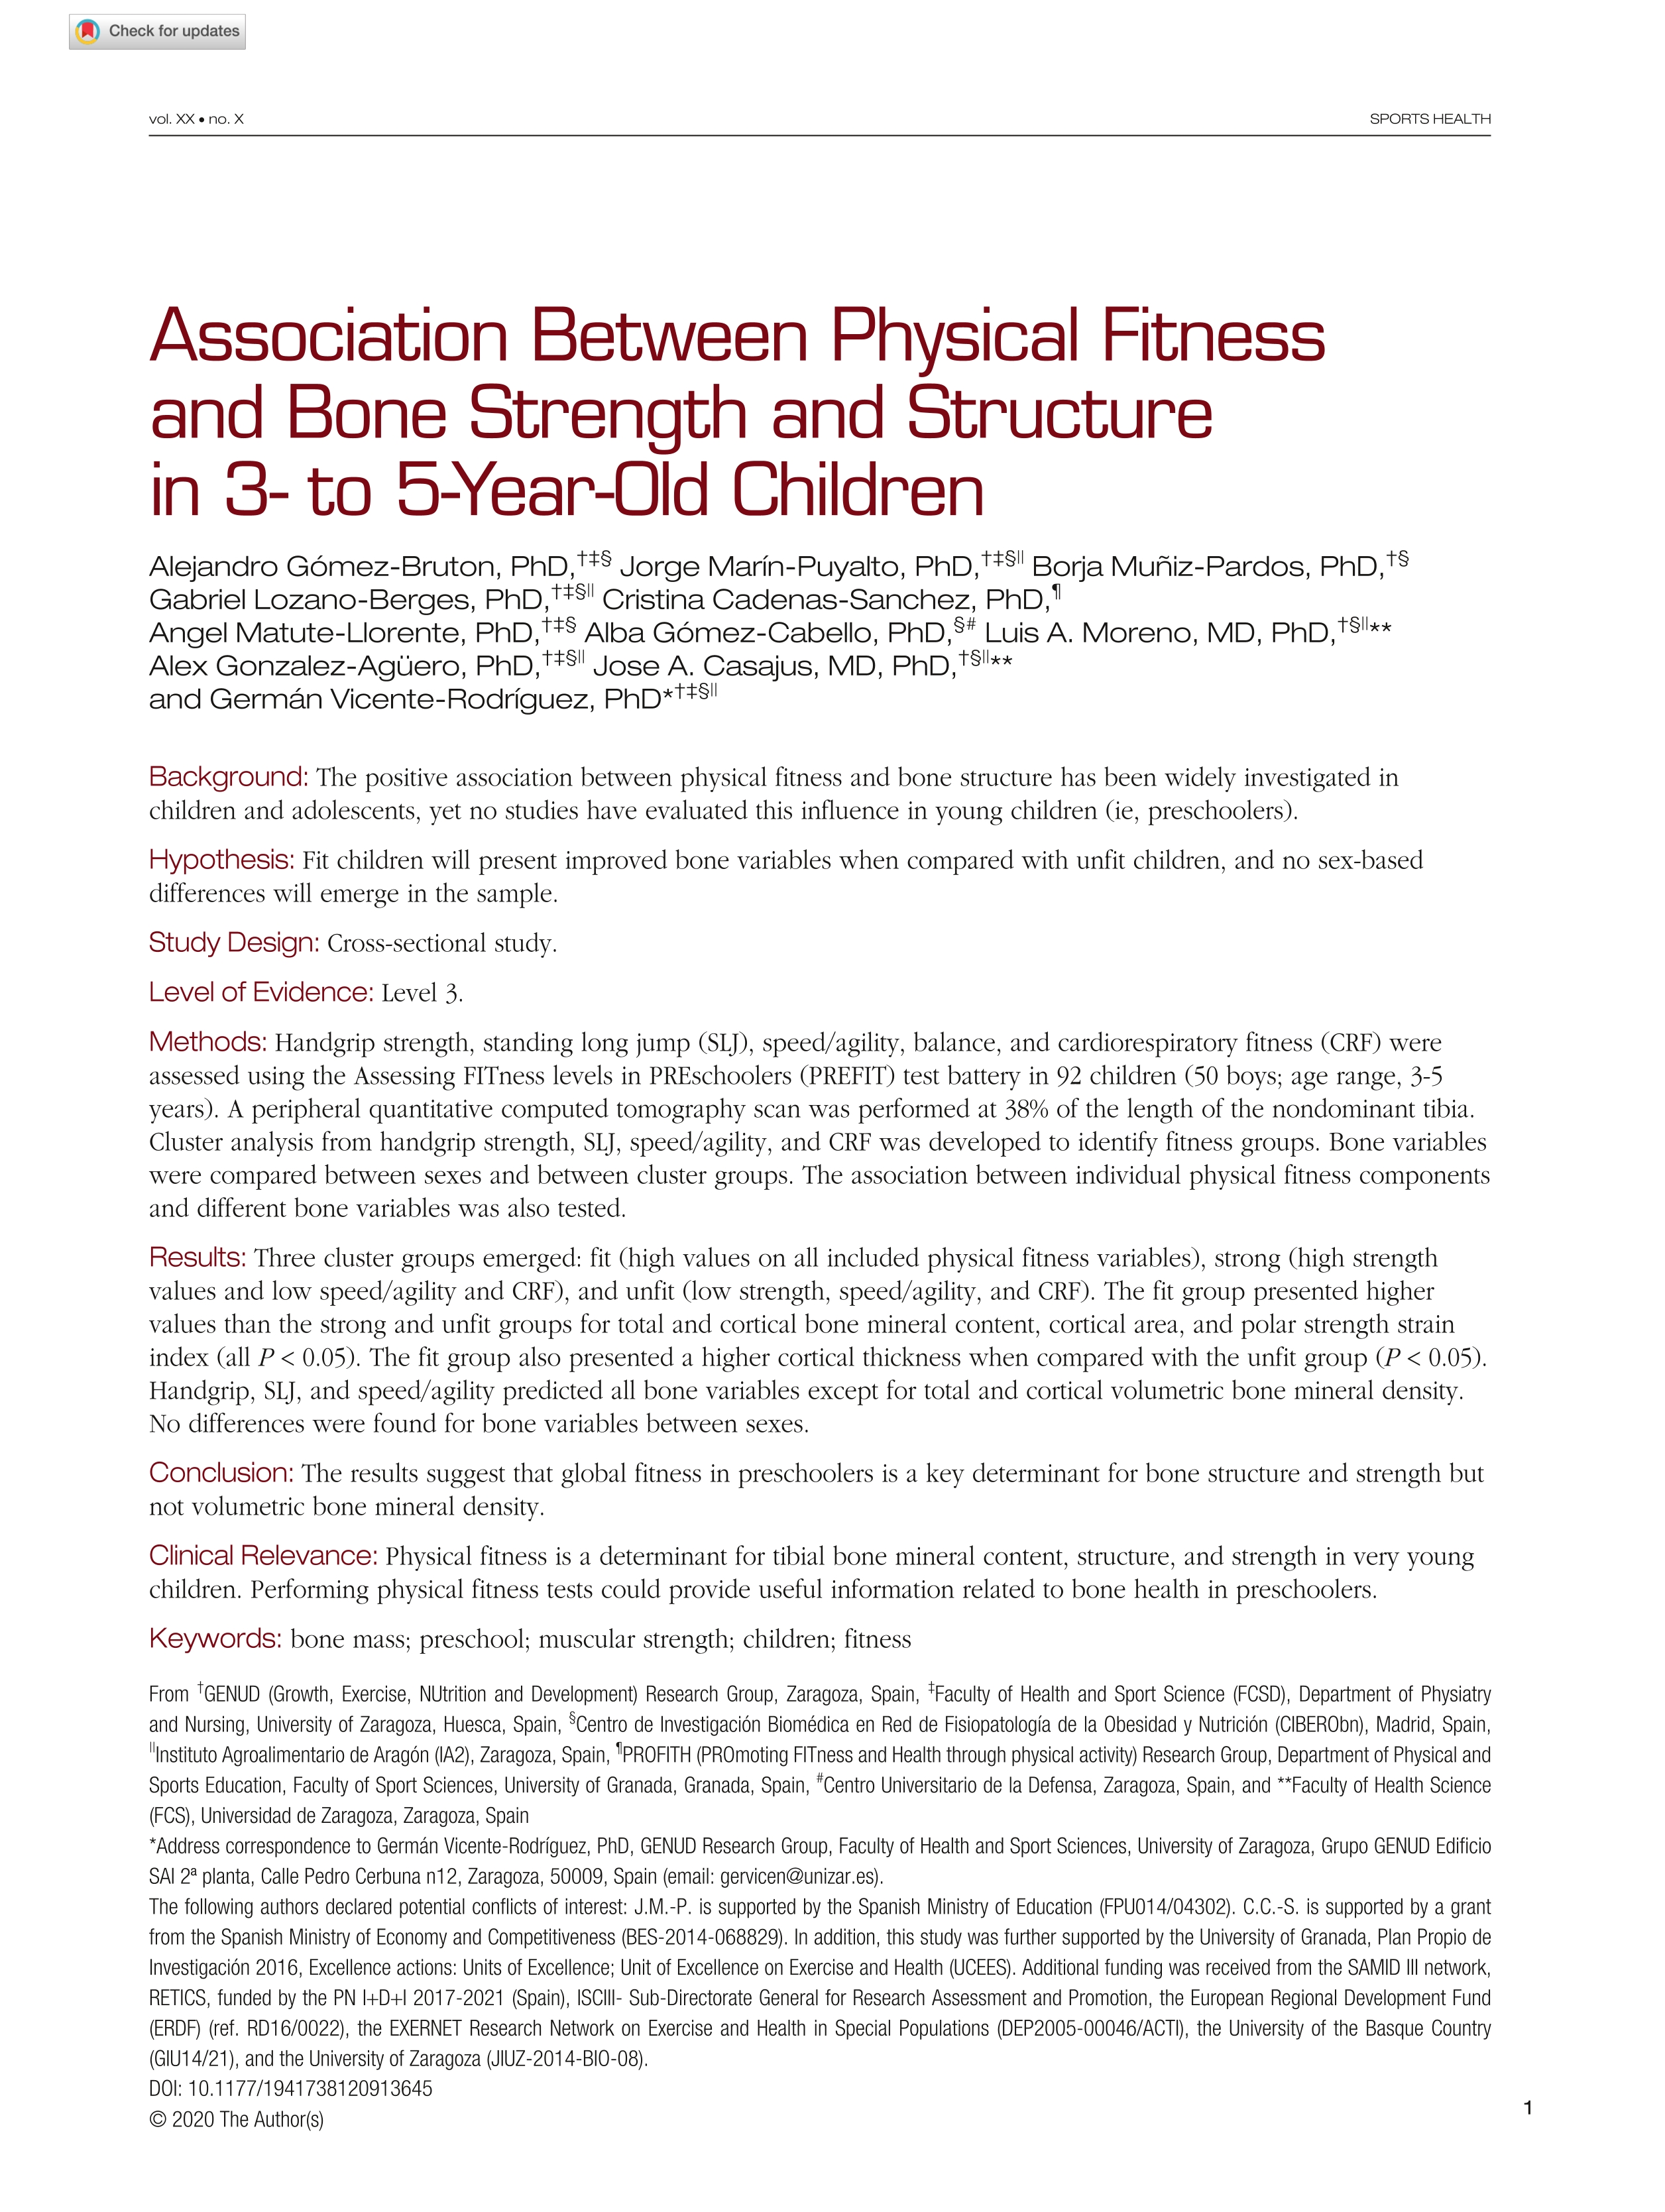 Association Between Physical Fitness and Bone Strength and Structure in 3- to 5-Year-Old Children